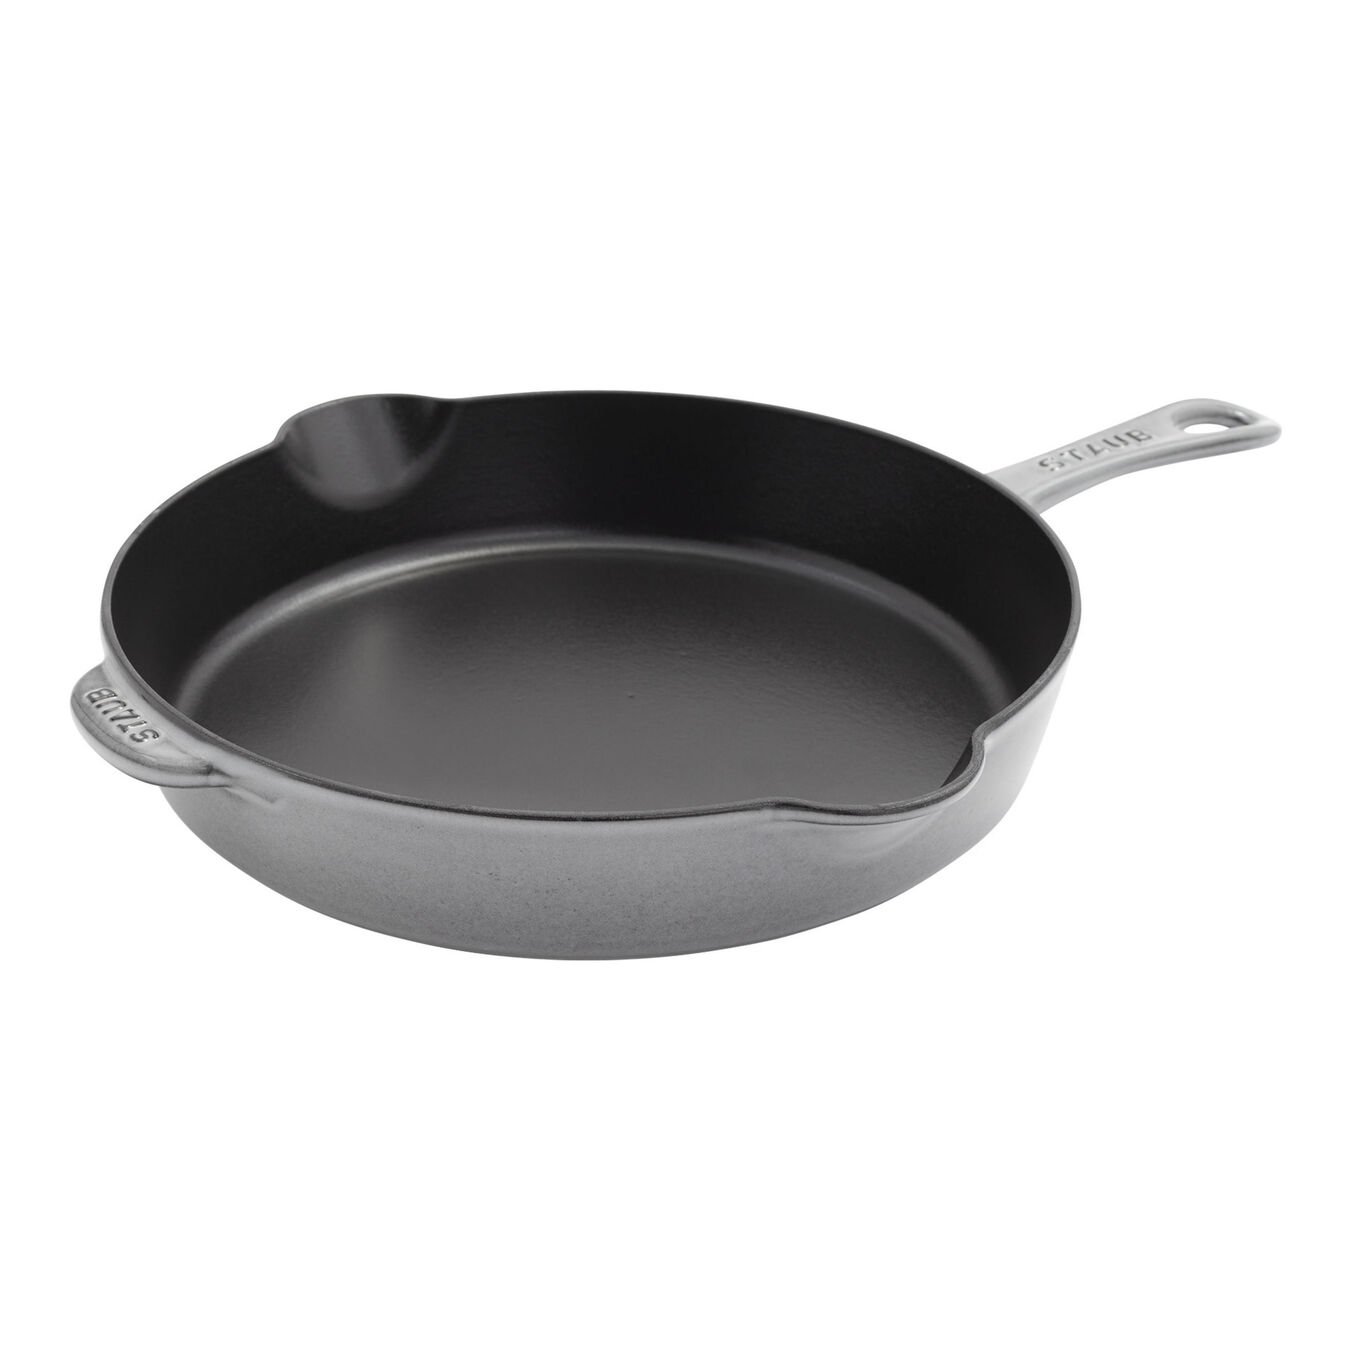 11-inch, Frying pan, graphite grey - Visual Imperfections,,large 1